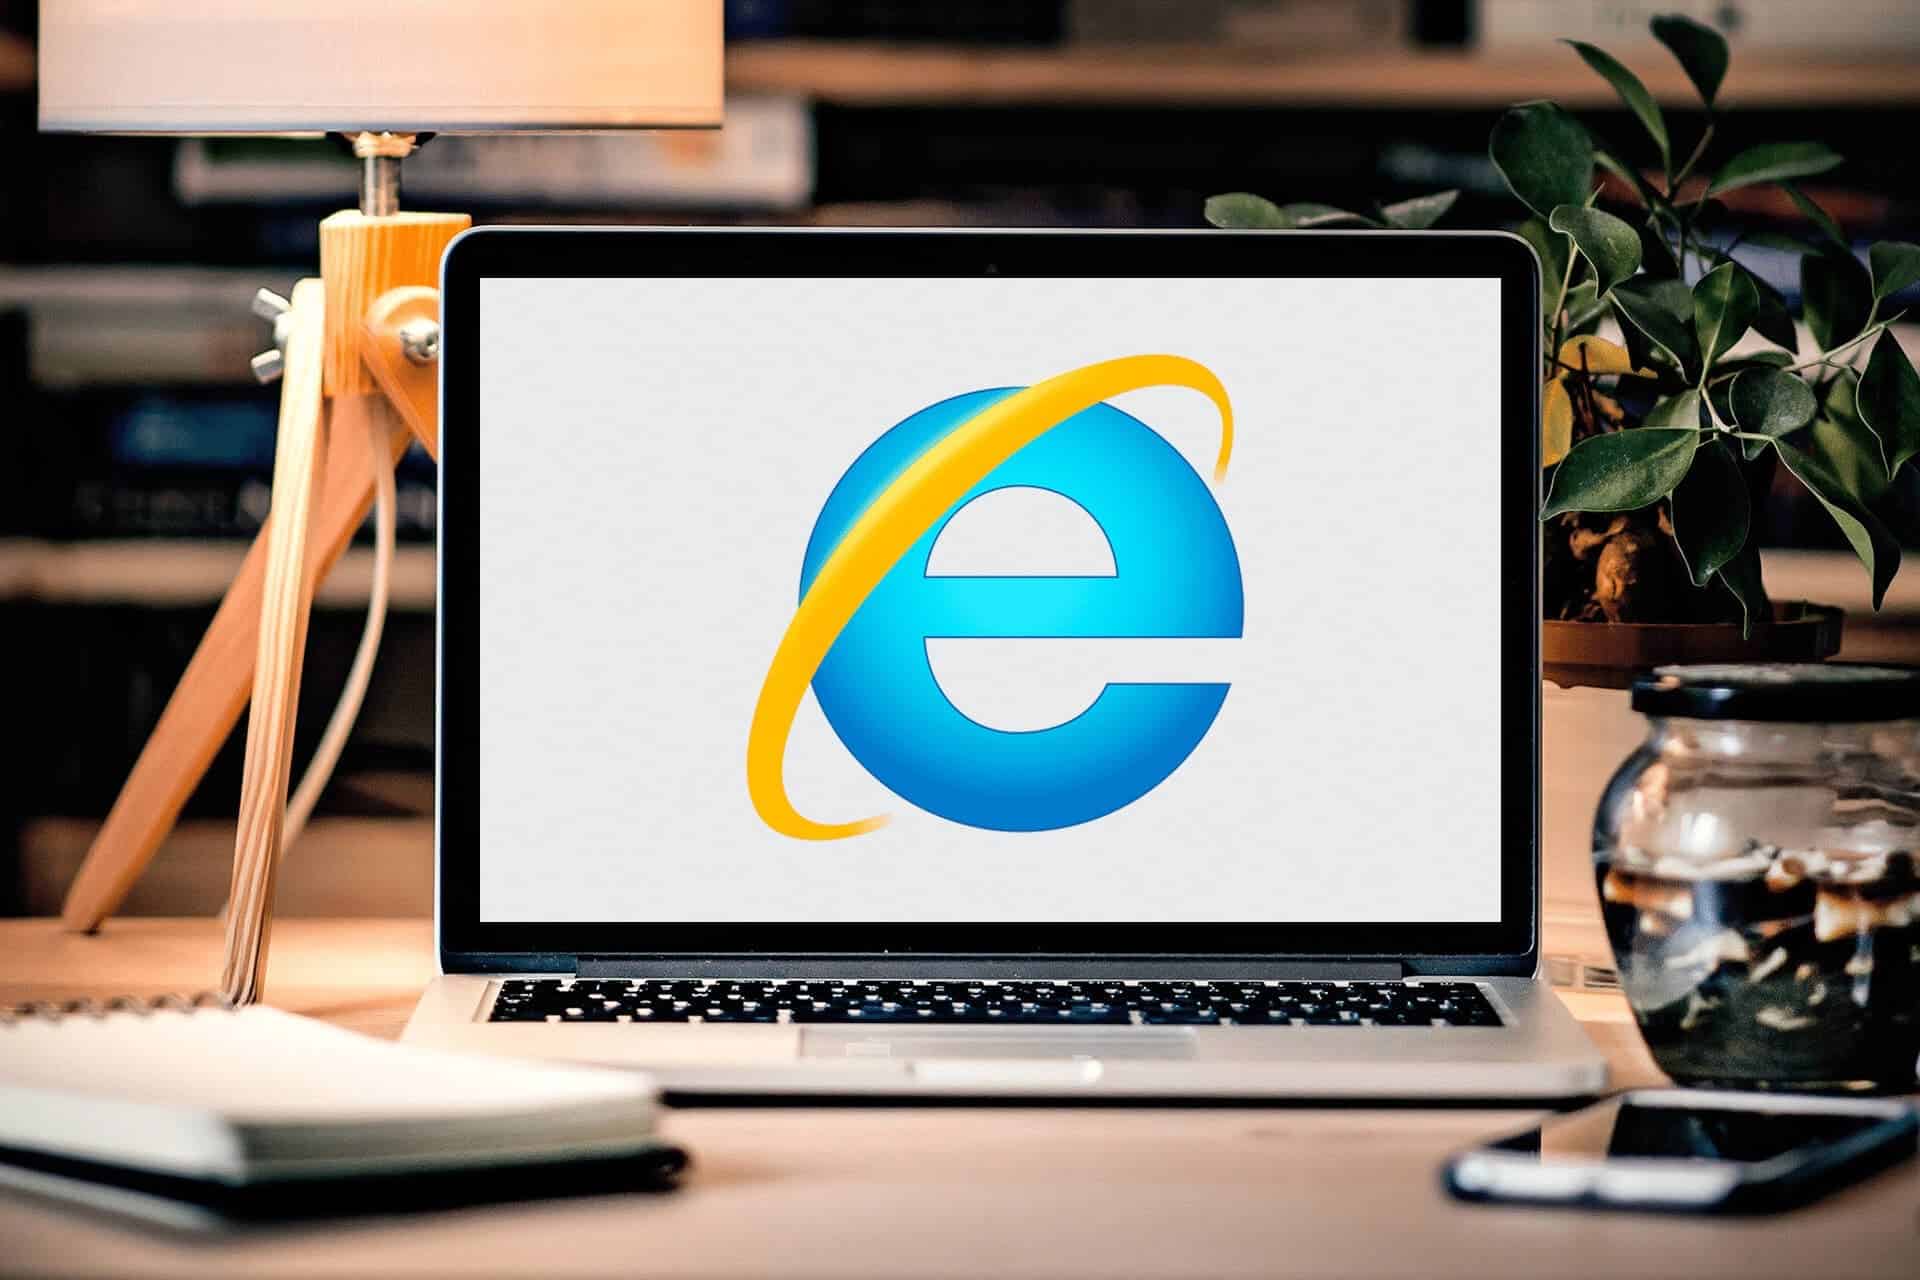 Microsoft Is Shutting Down Internet Explorer Browser After 27 Years